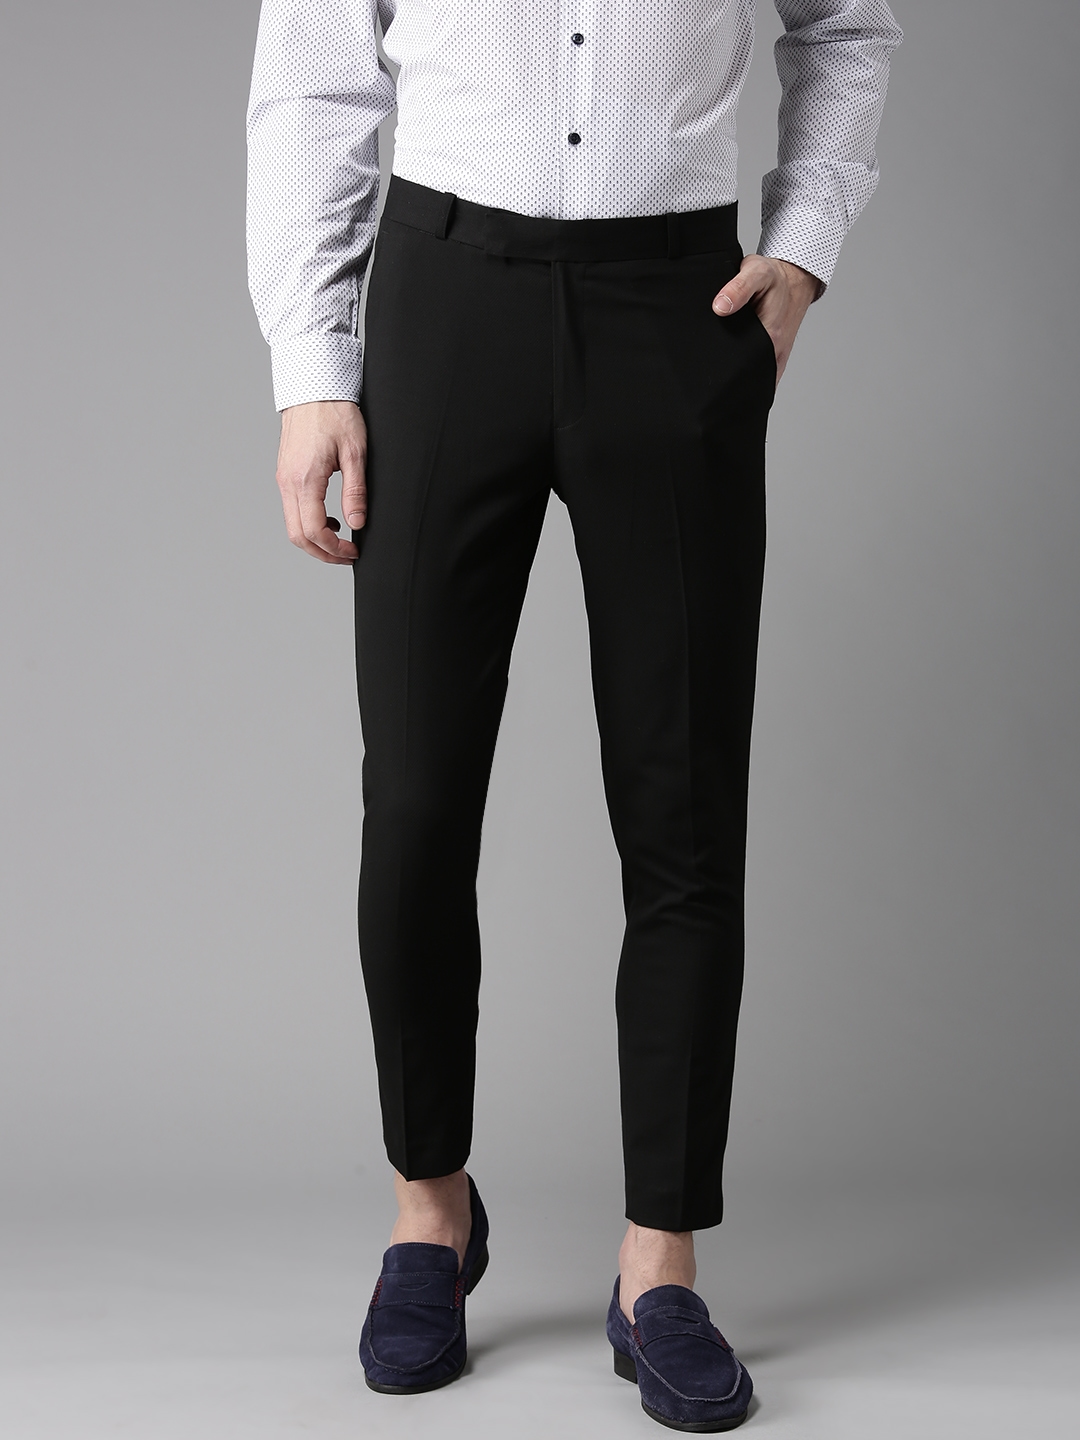 Experience more than 117 black trousers mens